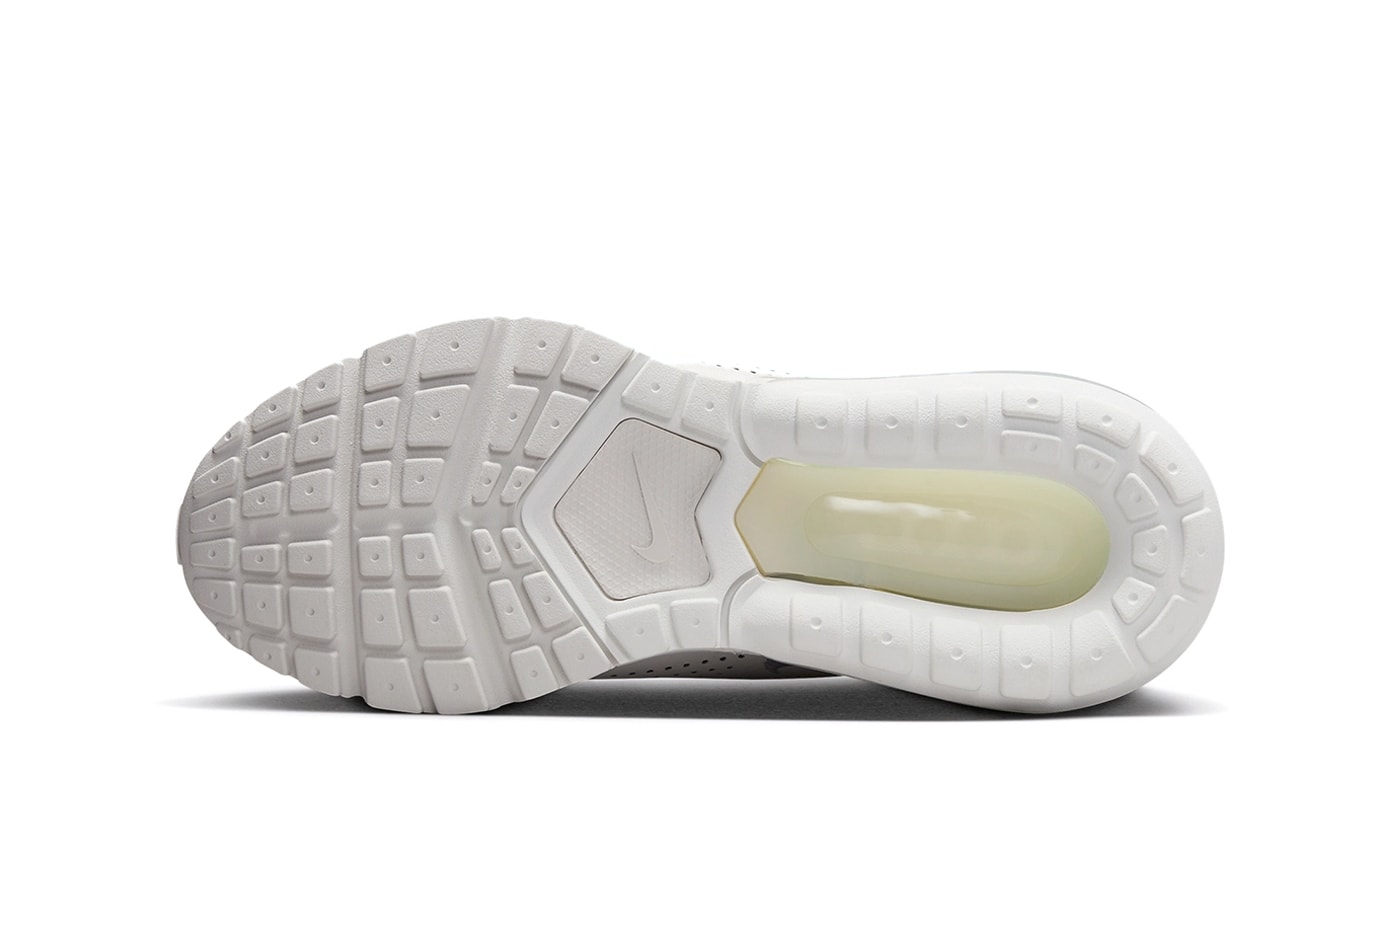 Nike Air Max Pulse Surfaces in Tonal "Sail" Hues for Summer womens all white shoe sneakers comfort everyday